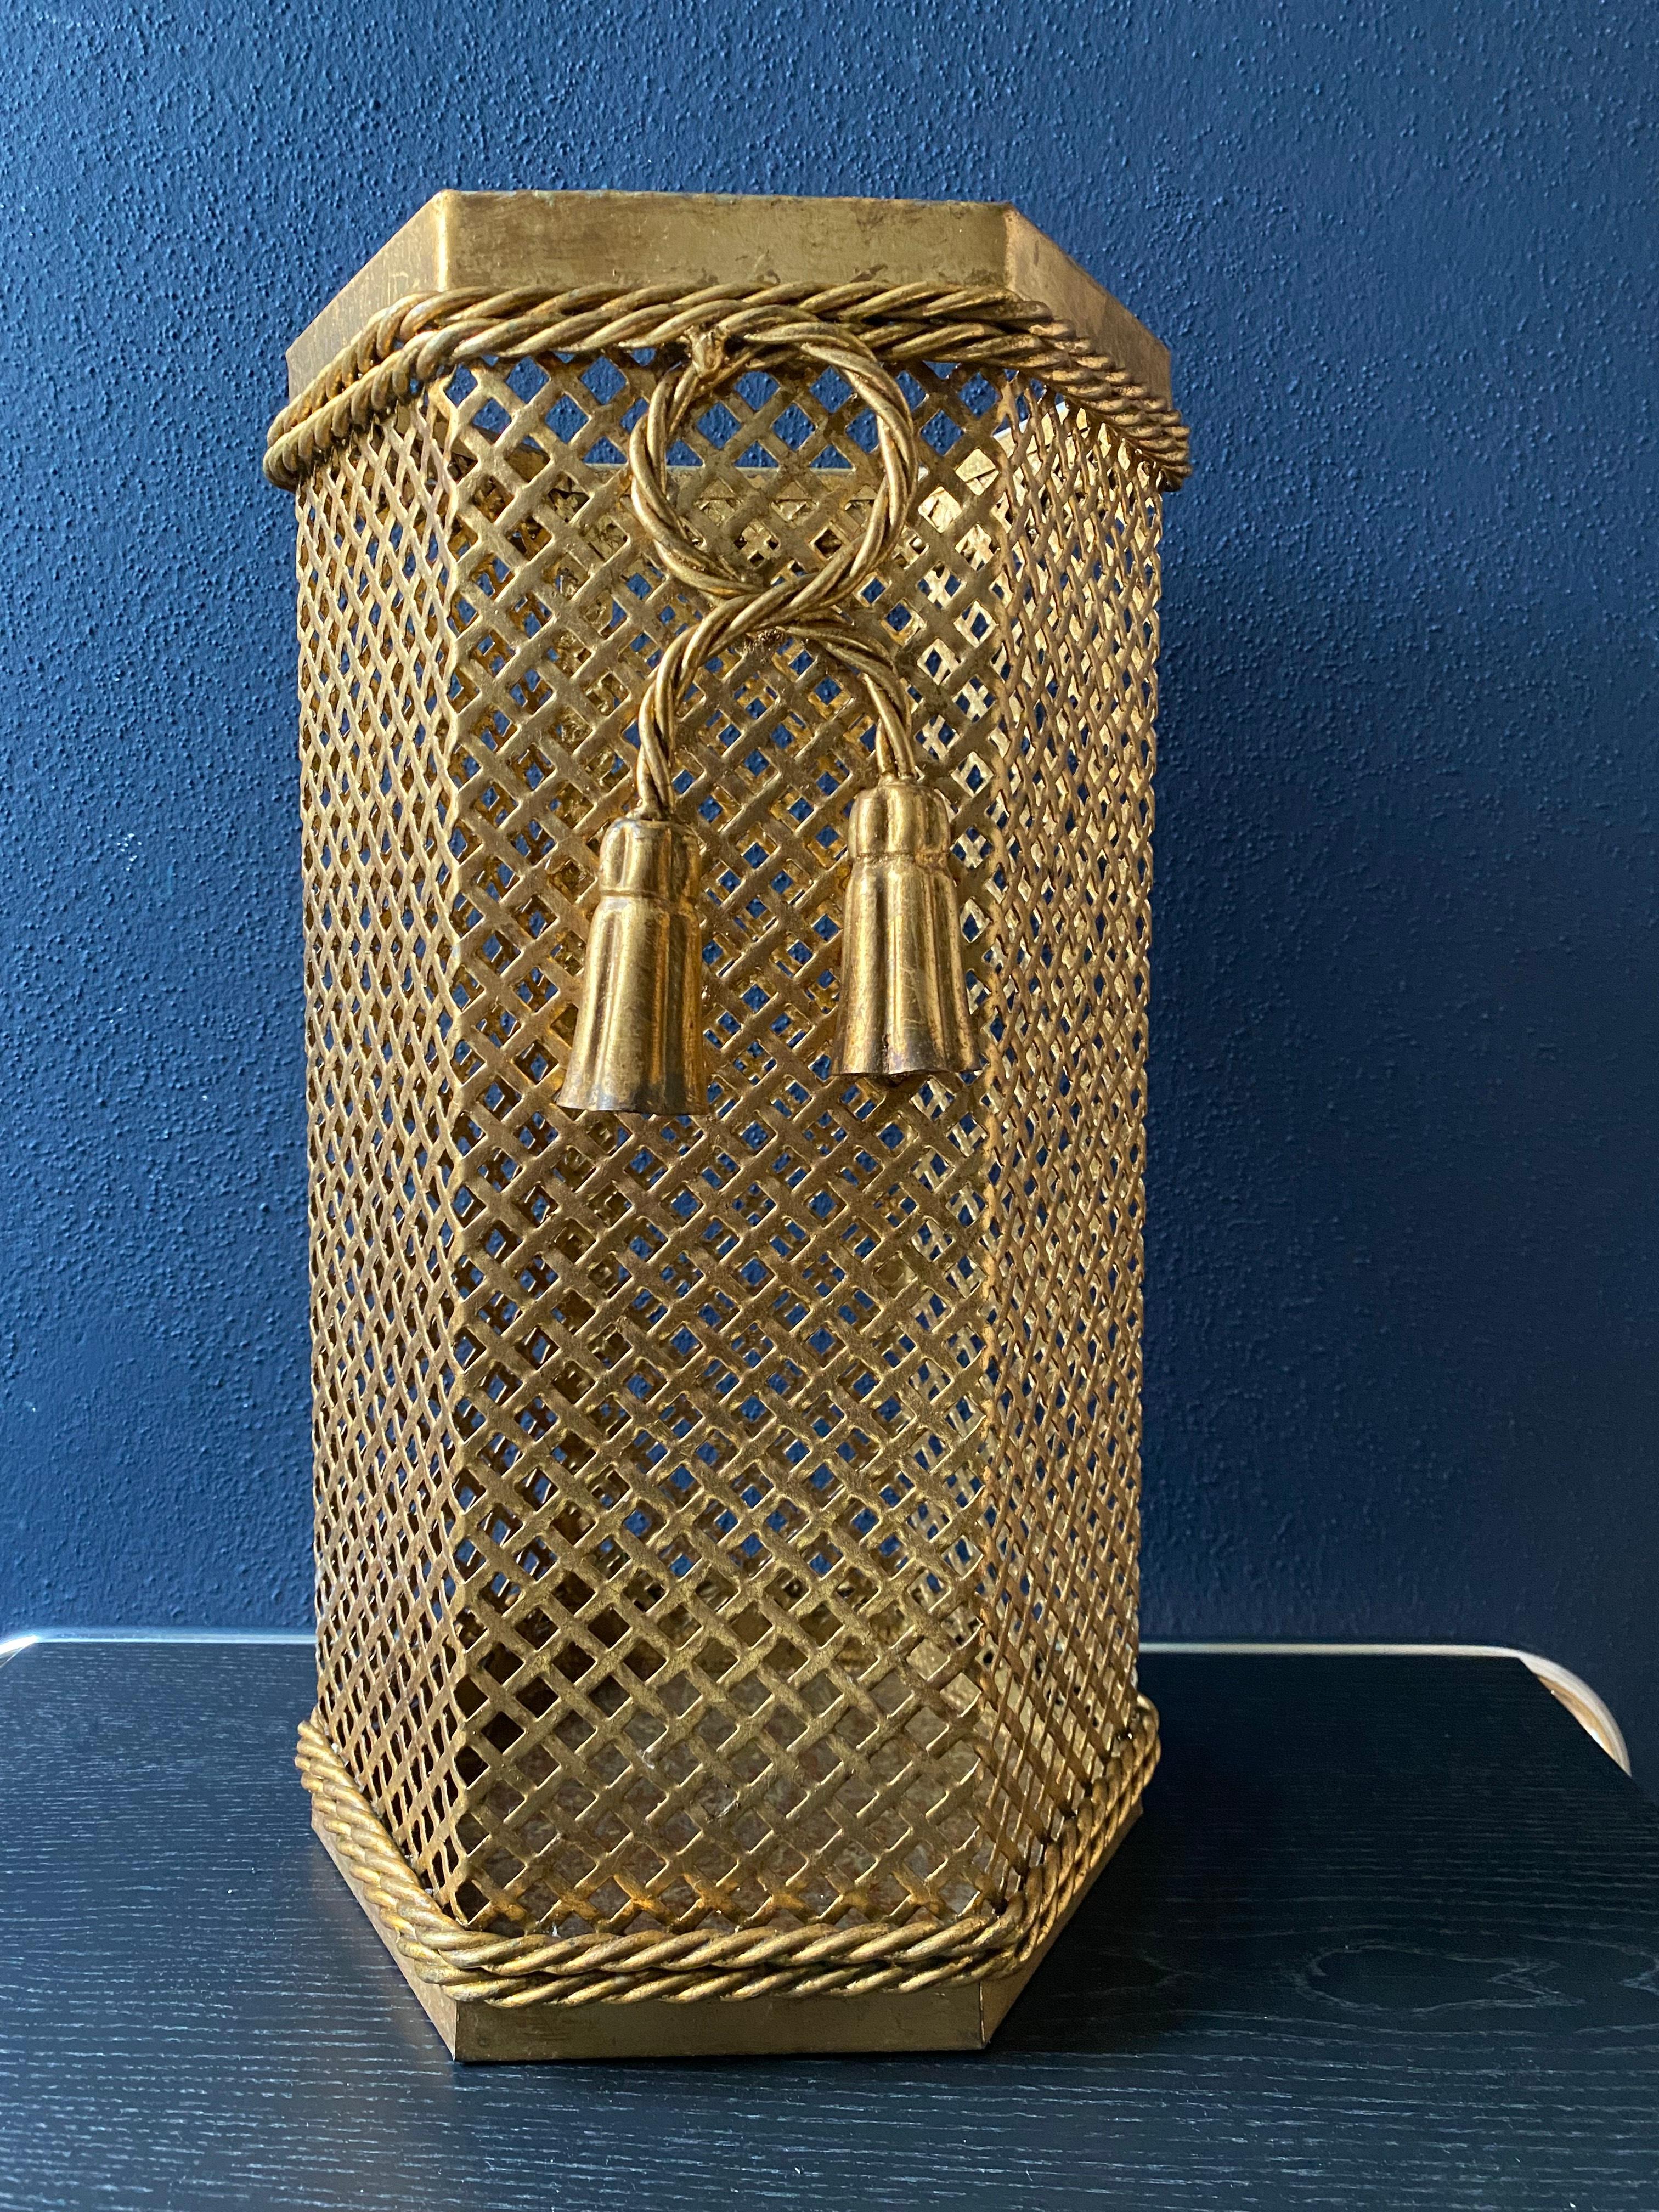 This hexagonal umbrella stand by Li Puma hails from Florence, Italy, and was manufactured in the 1950's,

While clearly identifiable as a Li Puma umbrella stand, with its typical perforated lattice pattern, bent rope and tassel detail and gold tone